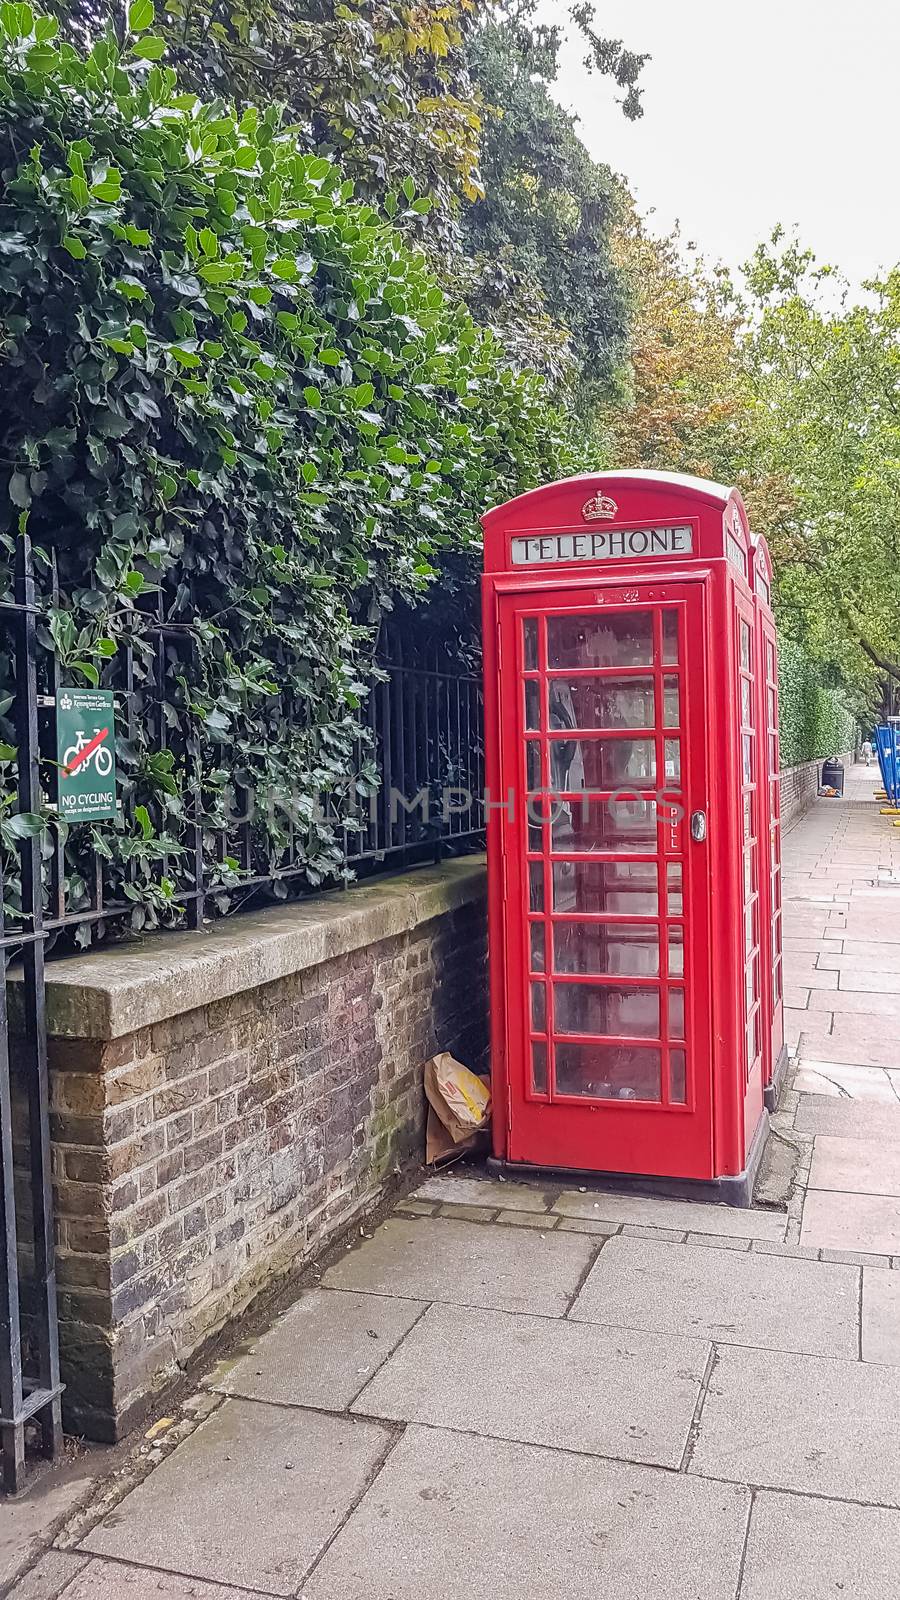 Classic red British telephone booth in London by DamantisZ